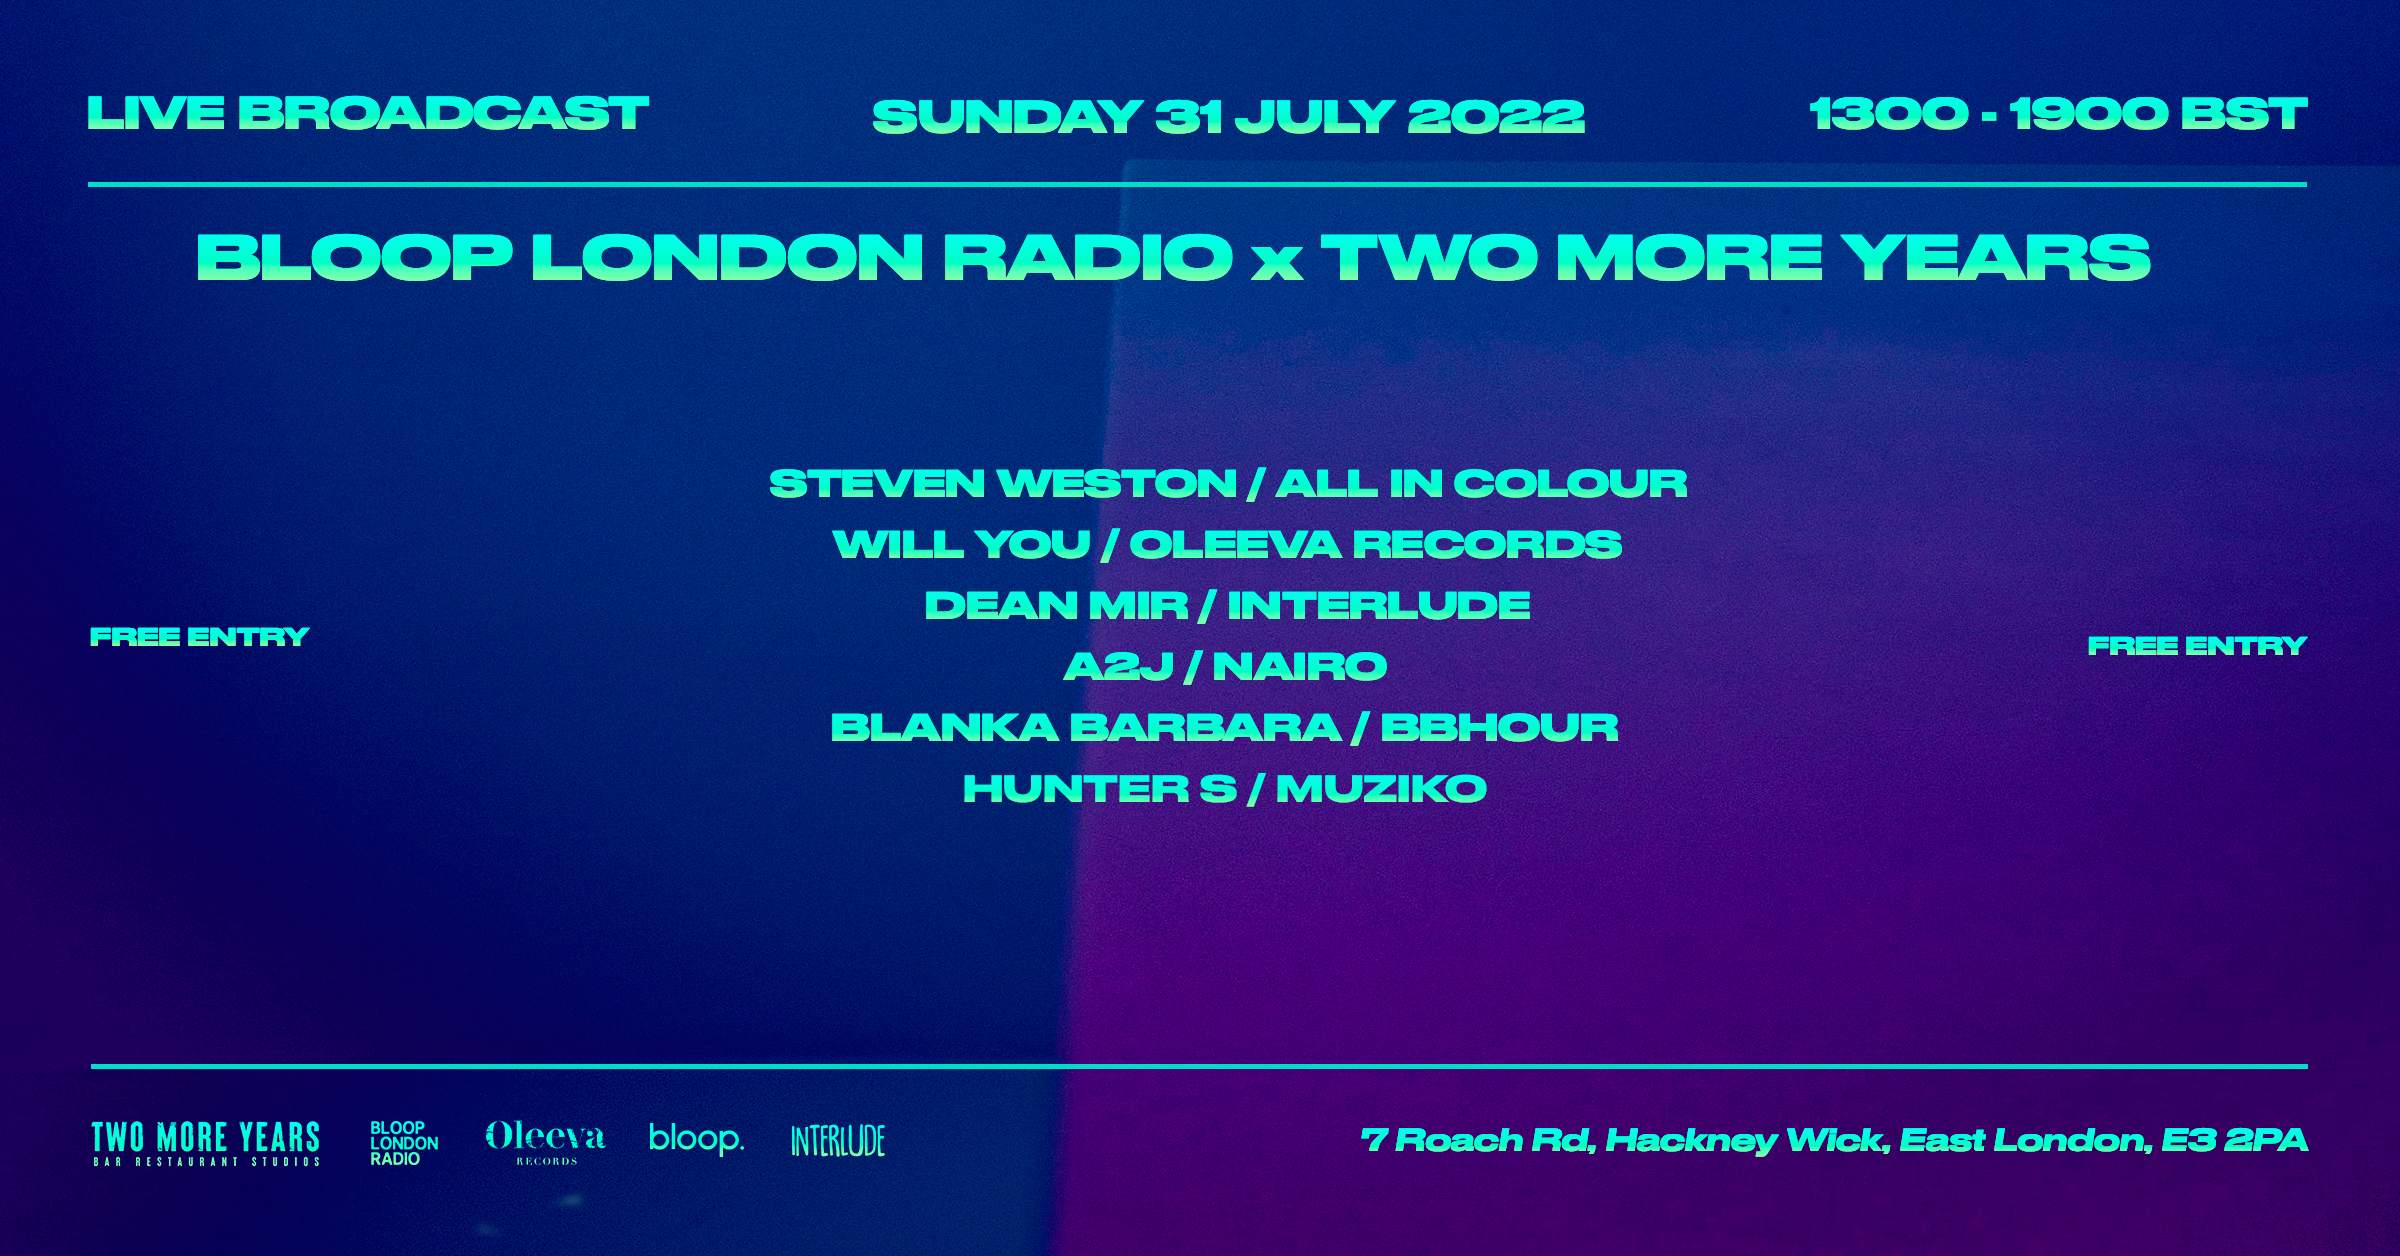 Bloop London Radio x Two More Years - フライヤー表